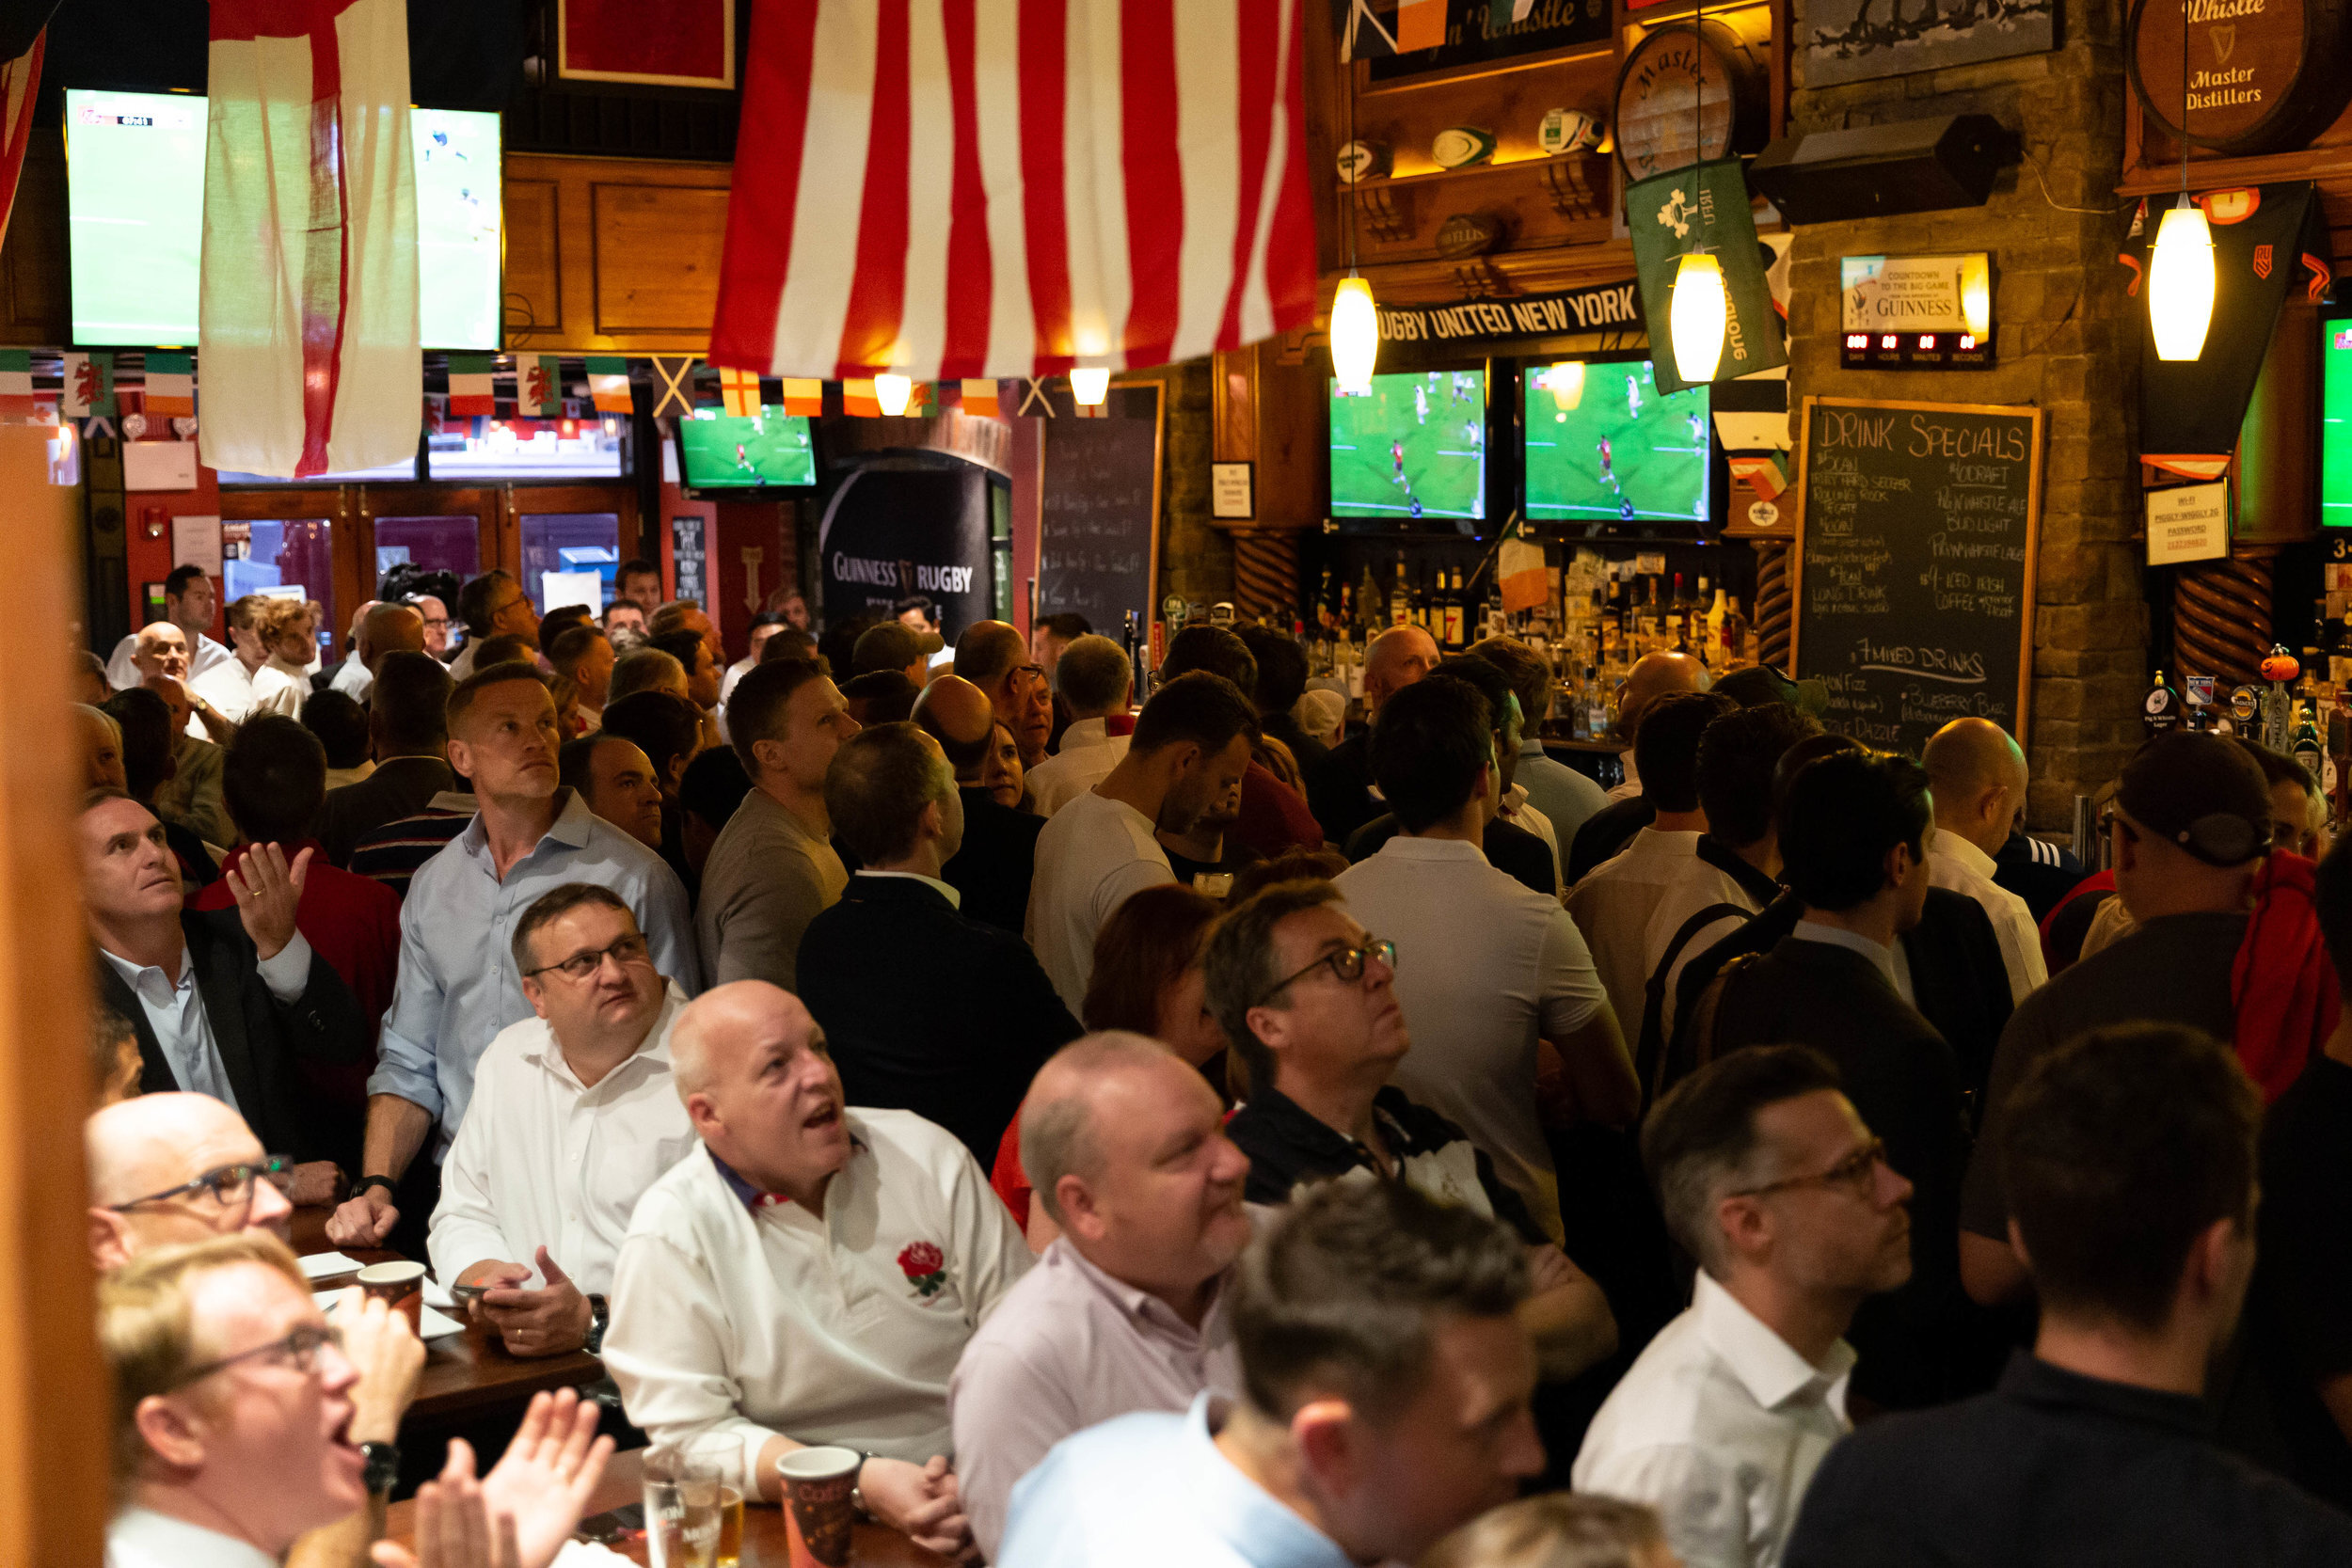  Longtime supporter, Captain’s Knocks selected St. George’s Society as a charity partner for the England v. USA Rugby World Cup Match Viewing Party at Pig-n-Whistle. Over $4,600 was raised all before 9:00 AM. 